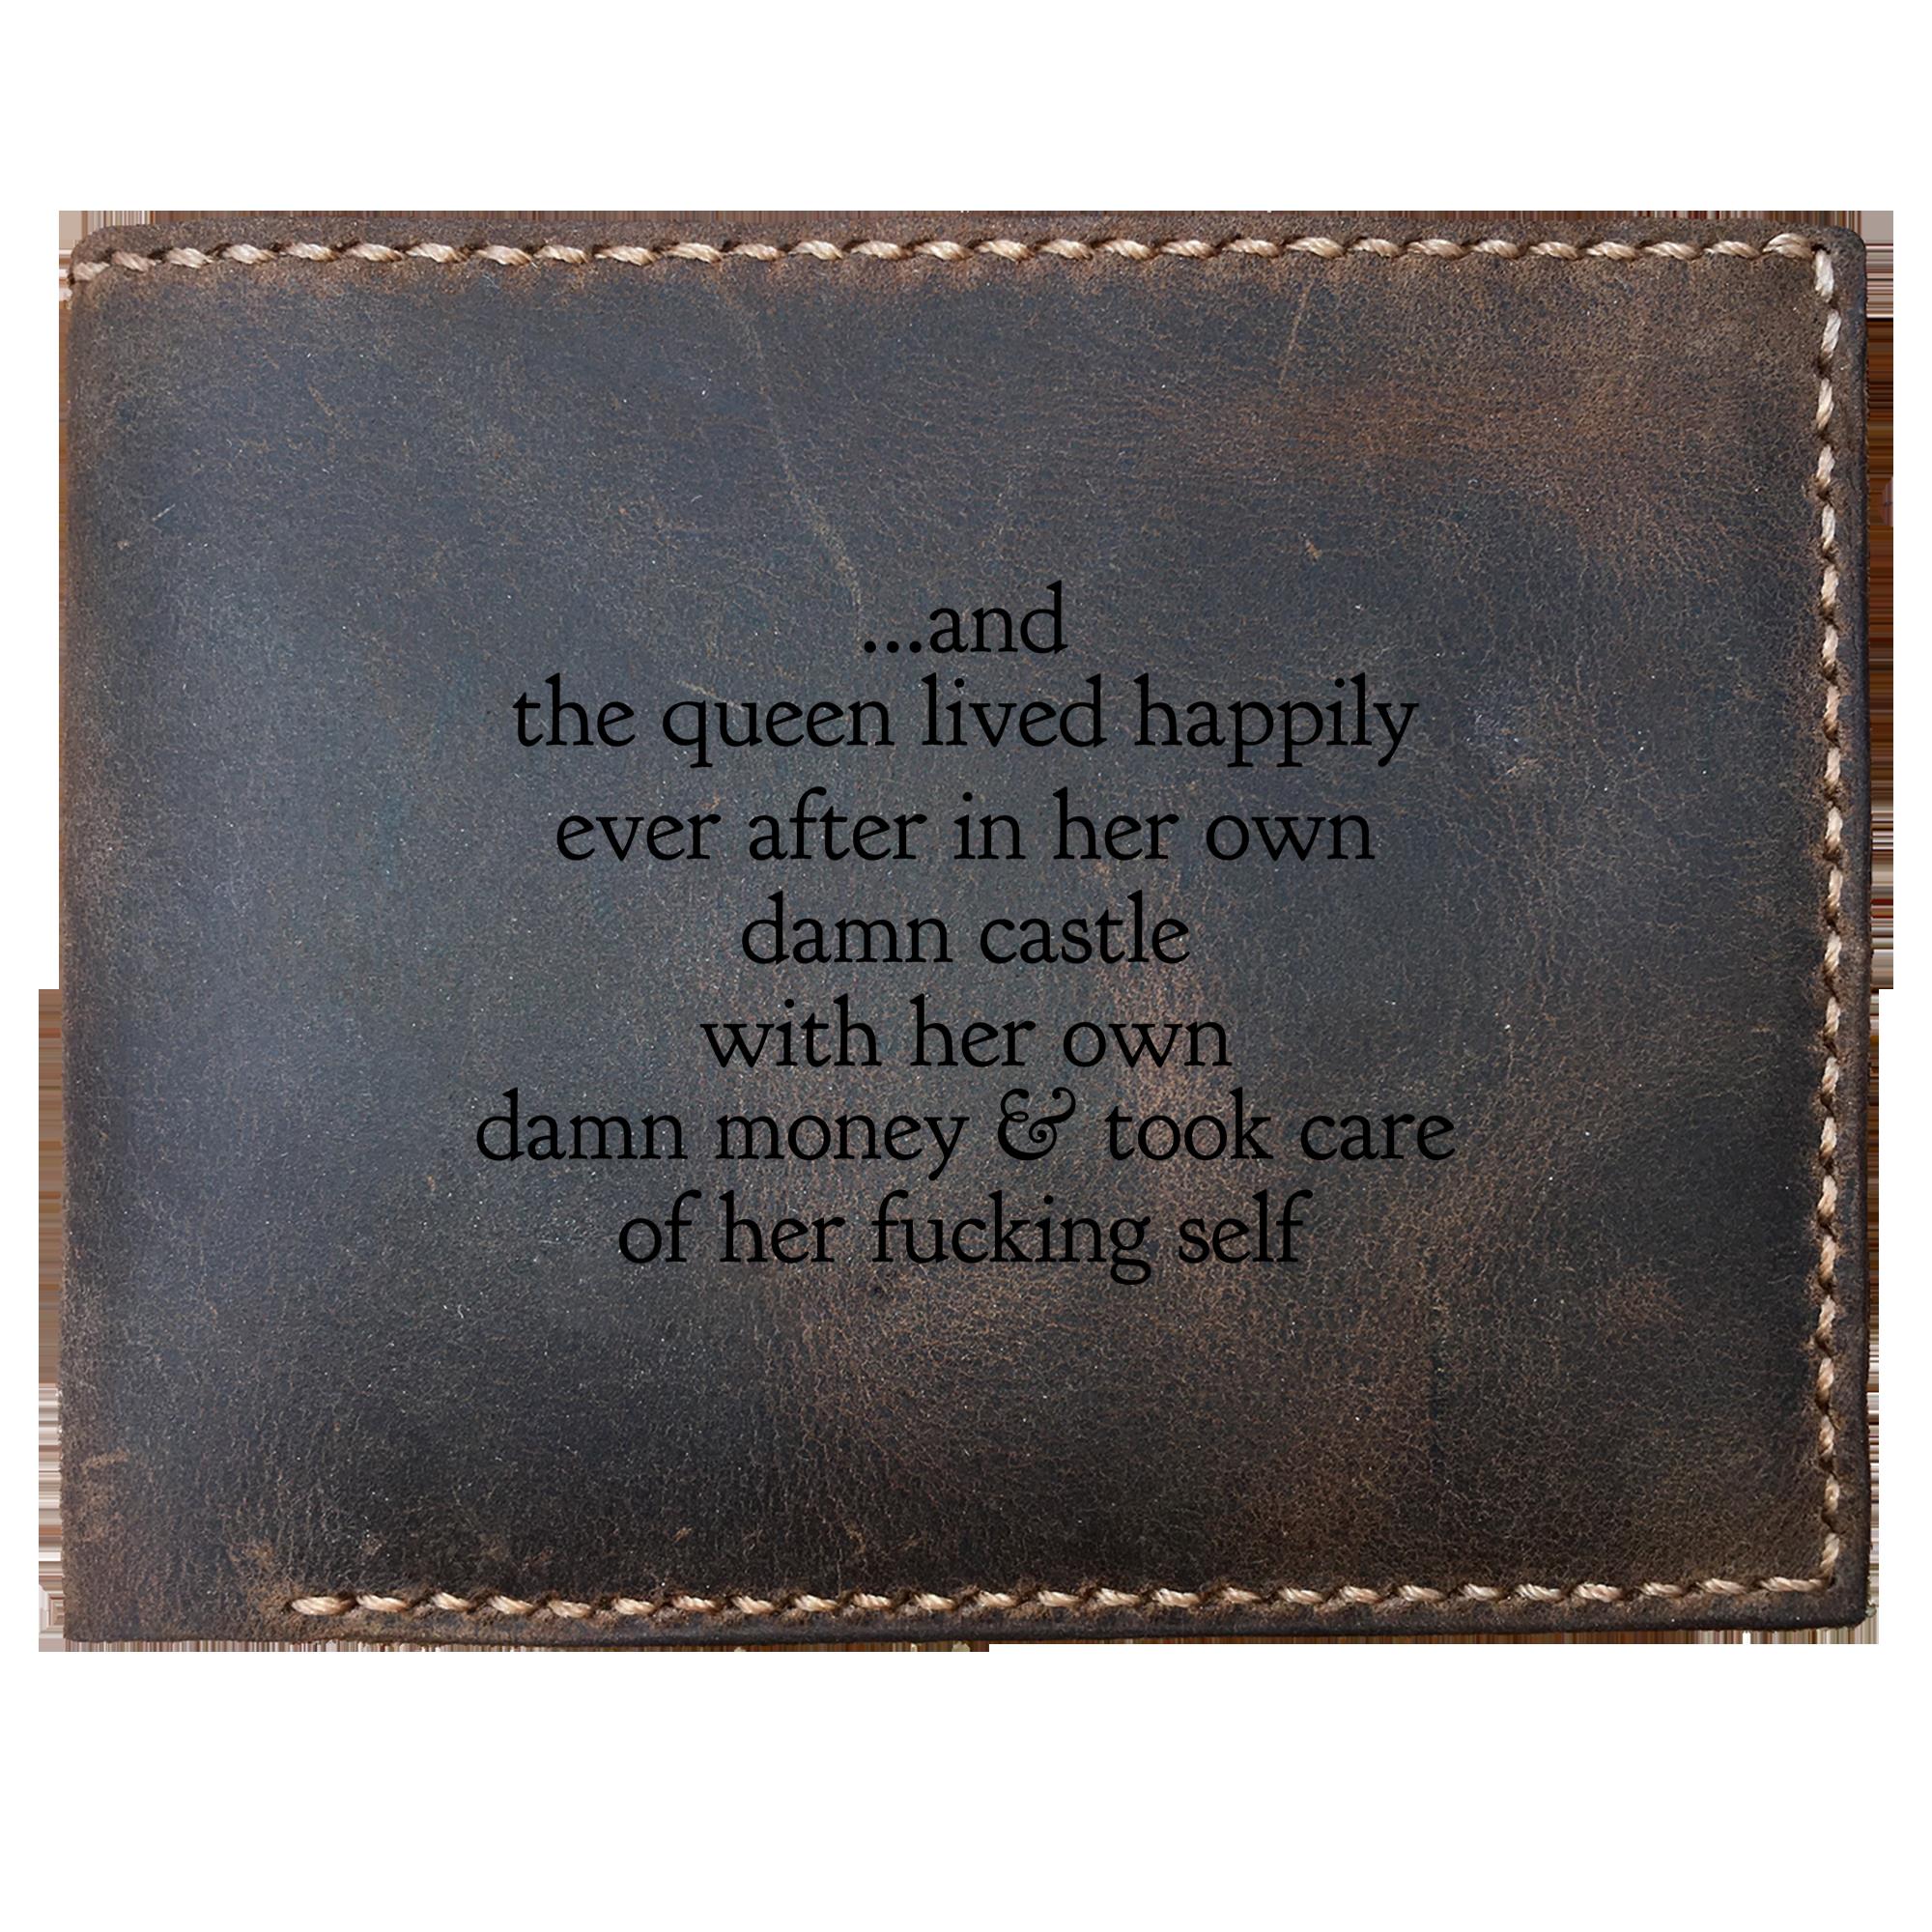 Skitongifts Funny Custom Laser Engraved Bifold Leather Wallet, Funny Divorce For Women Just Divorced, Break Up . Queen Lived Happily Ever After